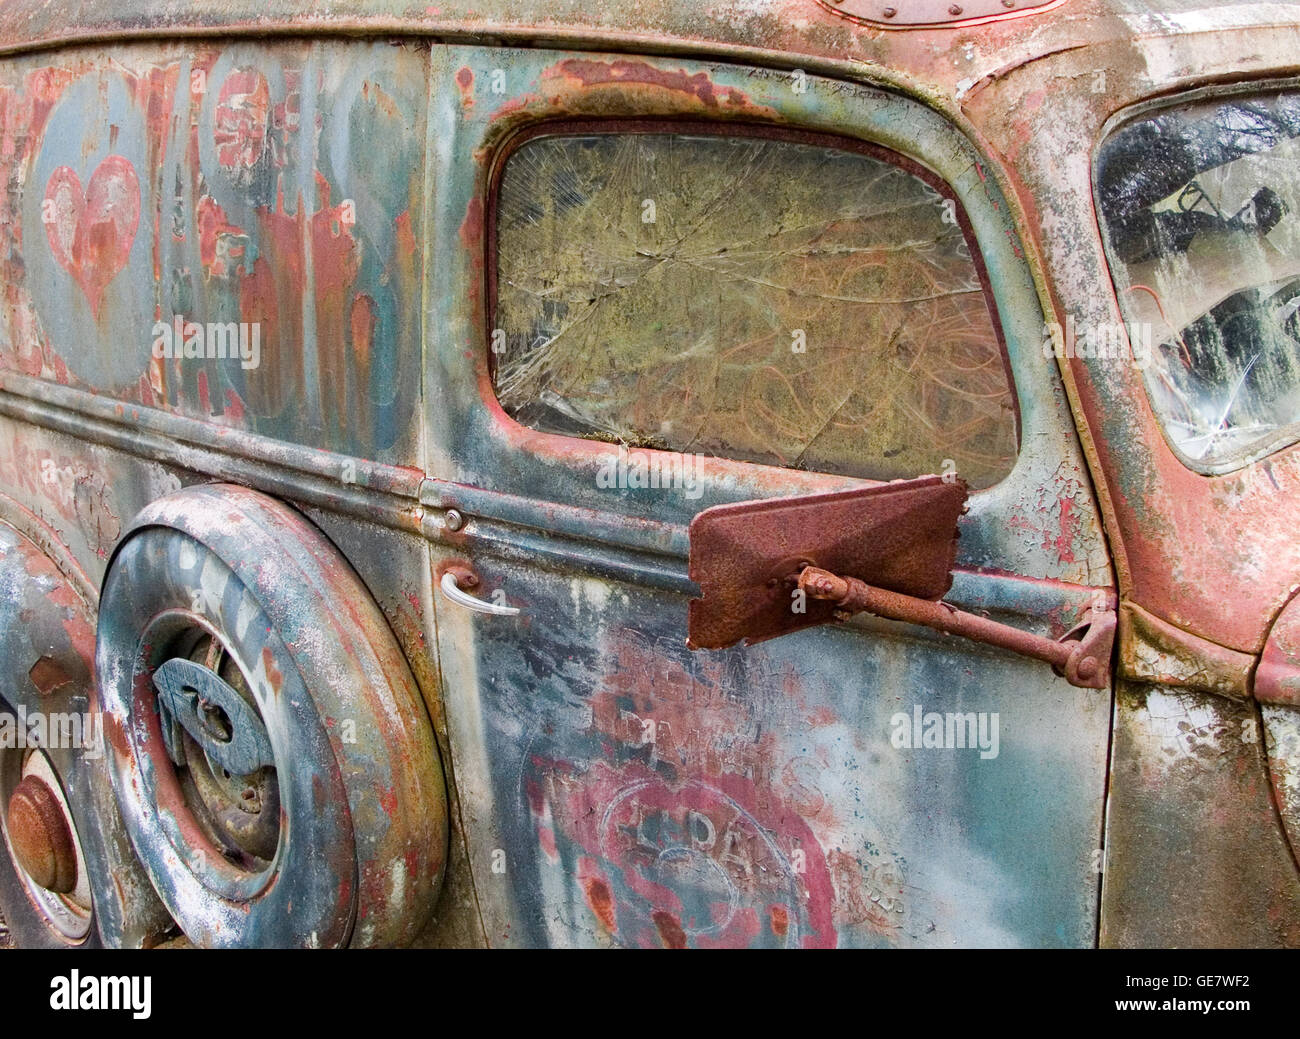 An abandoned Ford truck makes the subject for this nostalgic photo abstract. Stock Photo